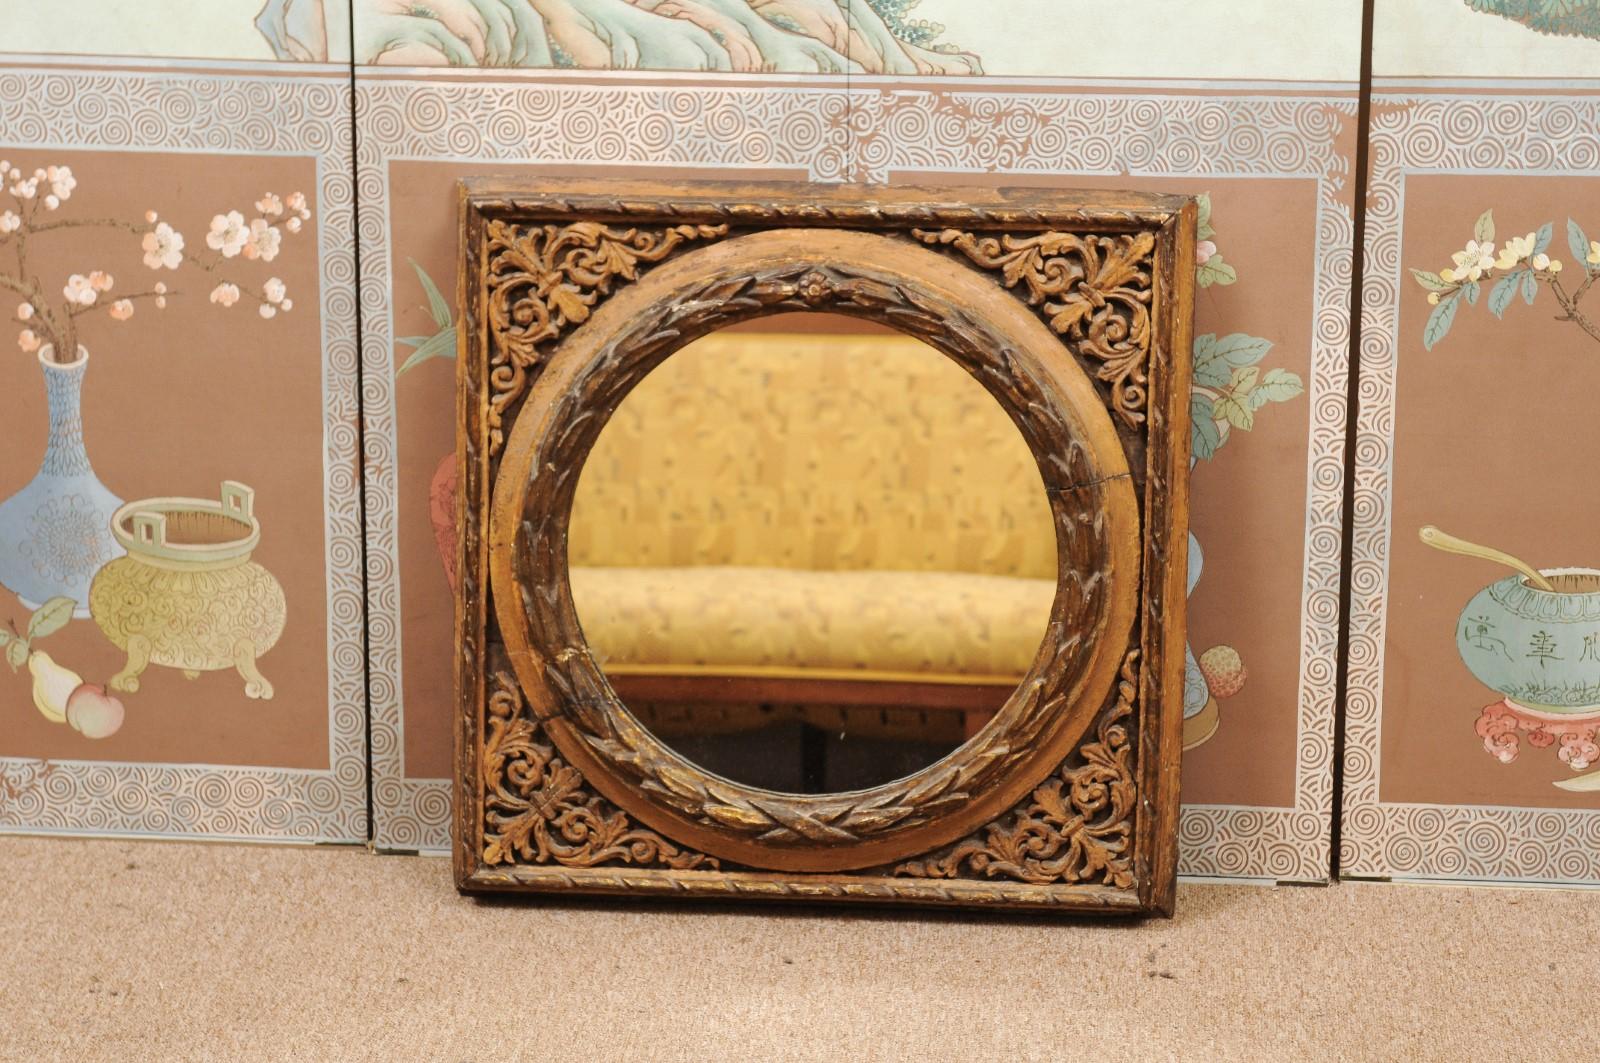 A 19th century Italian giltwood square frame featuring stylized acanthus leaf carving and laurel leaf carving boarding mirror plate.